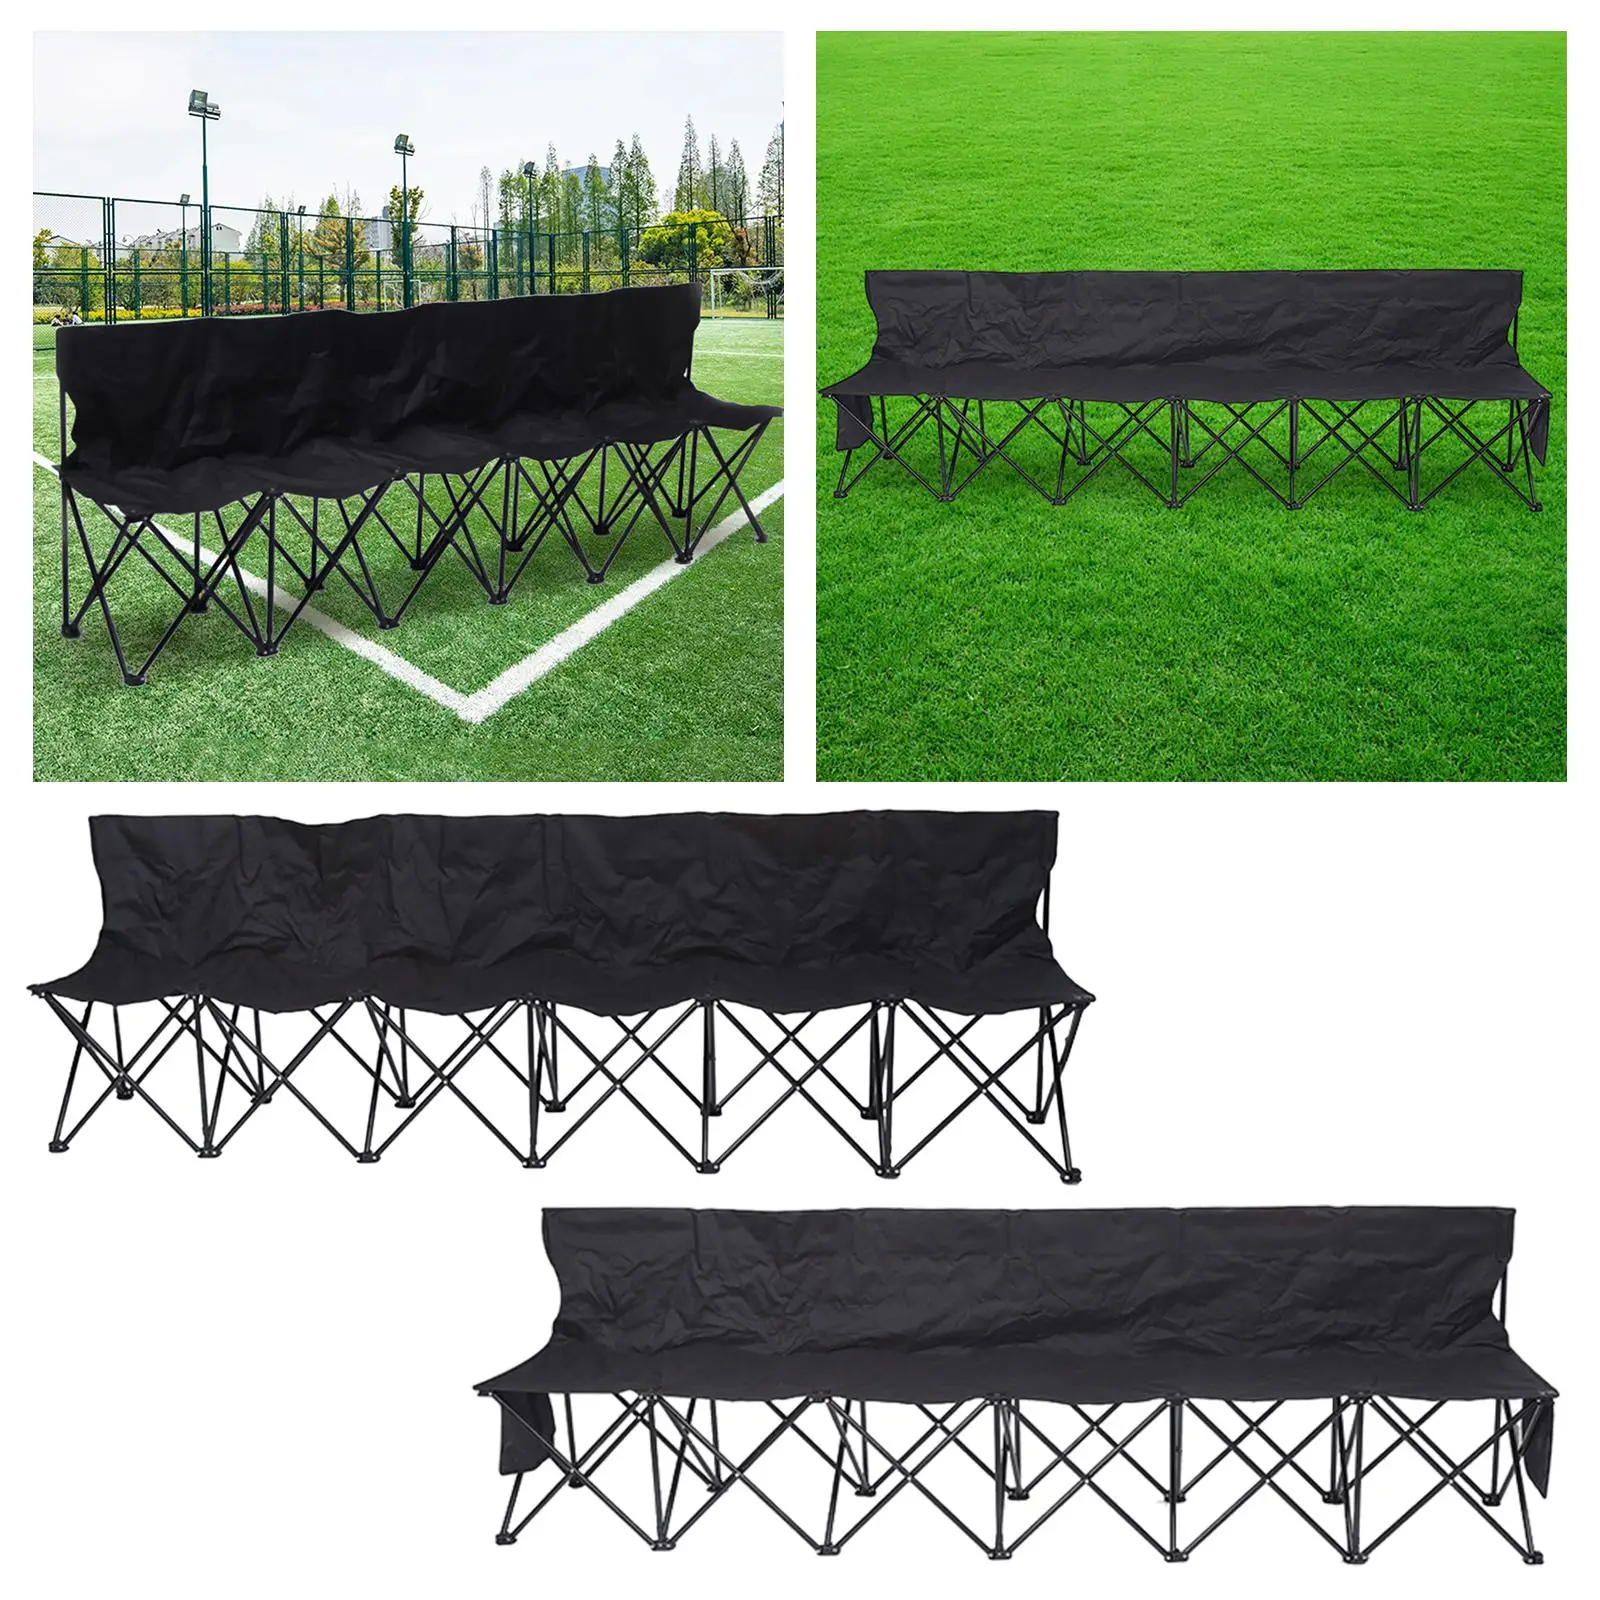 6 Person Folding Camping Chair Seat Bench for Campsites Camping Sports